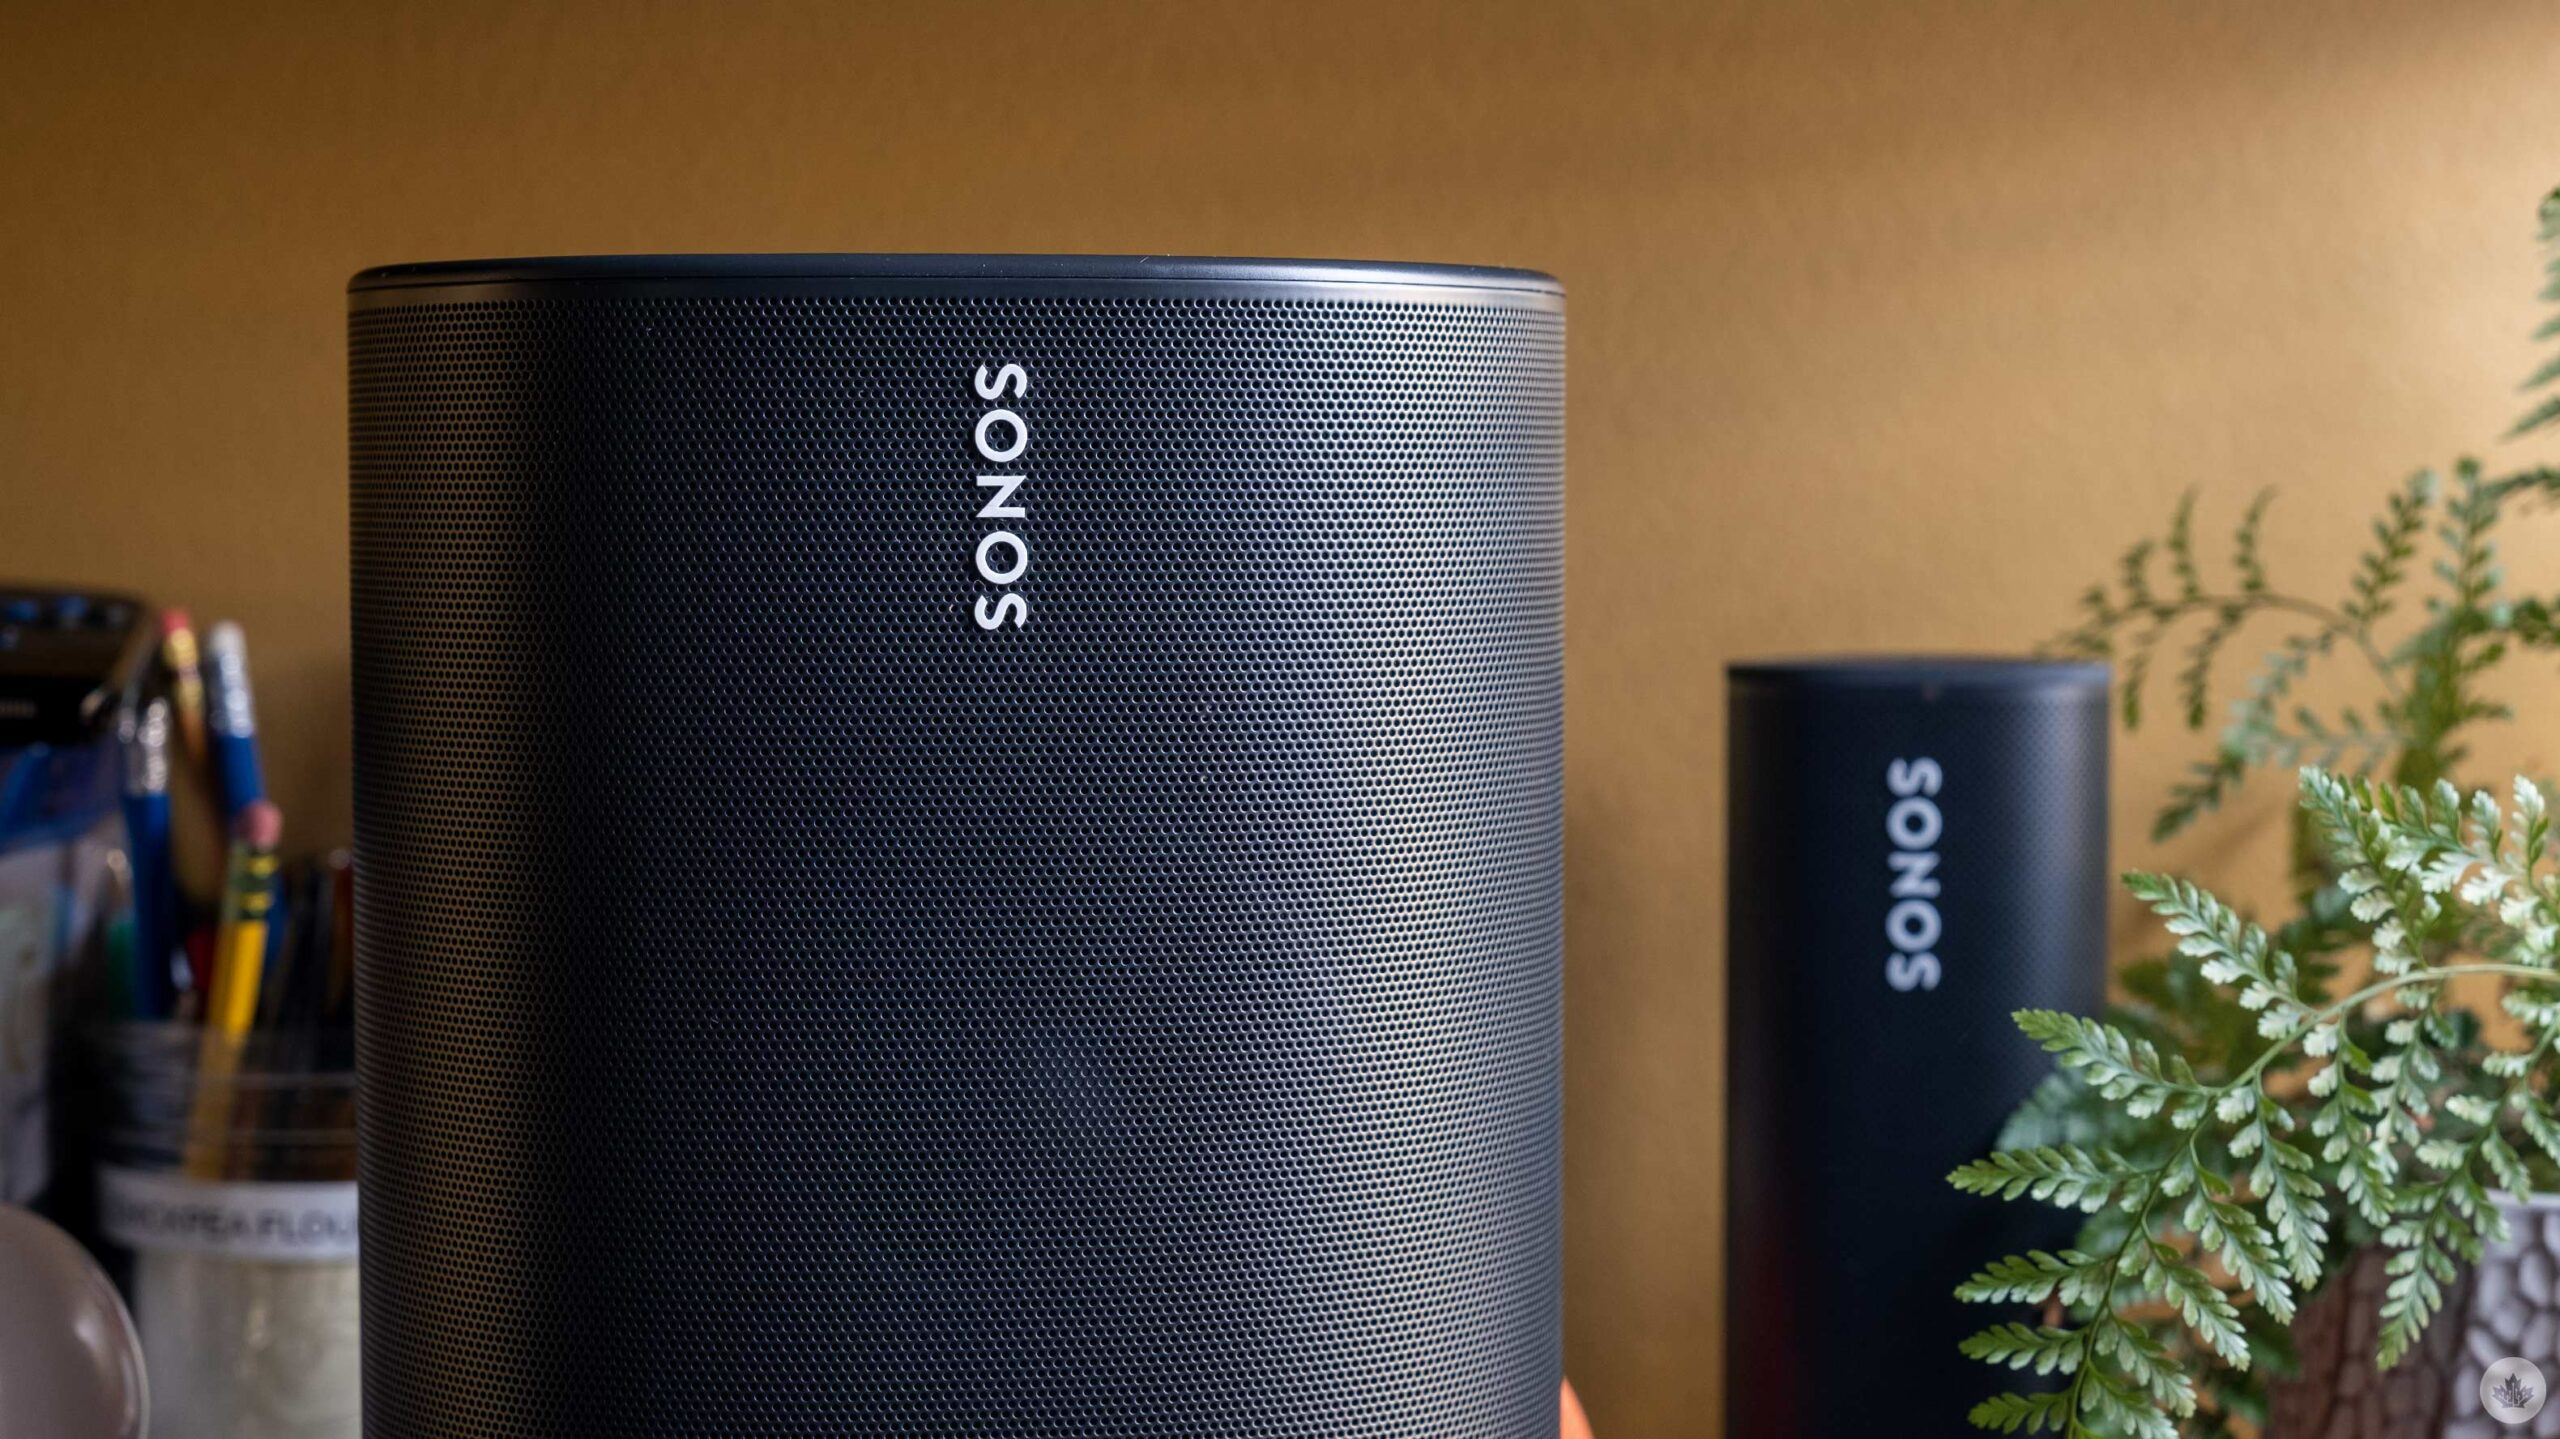 Sonos’ long-awaited headphones could launch as soon as next spring